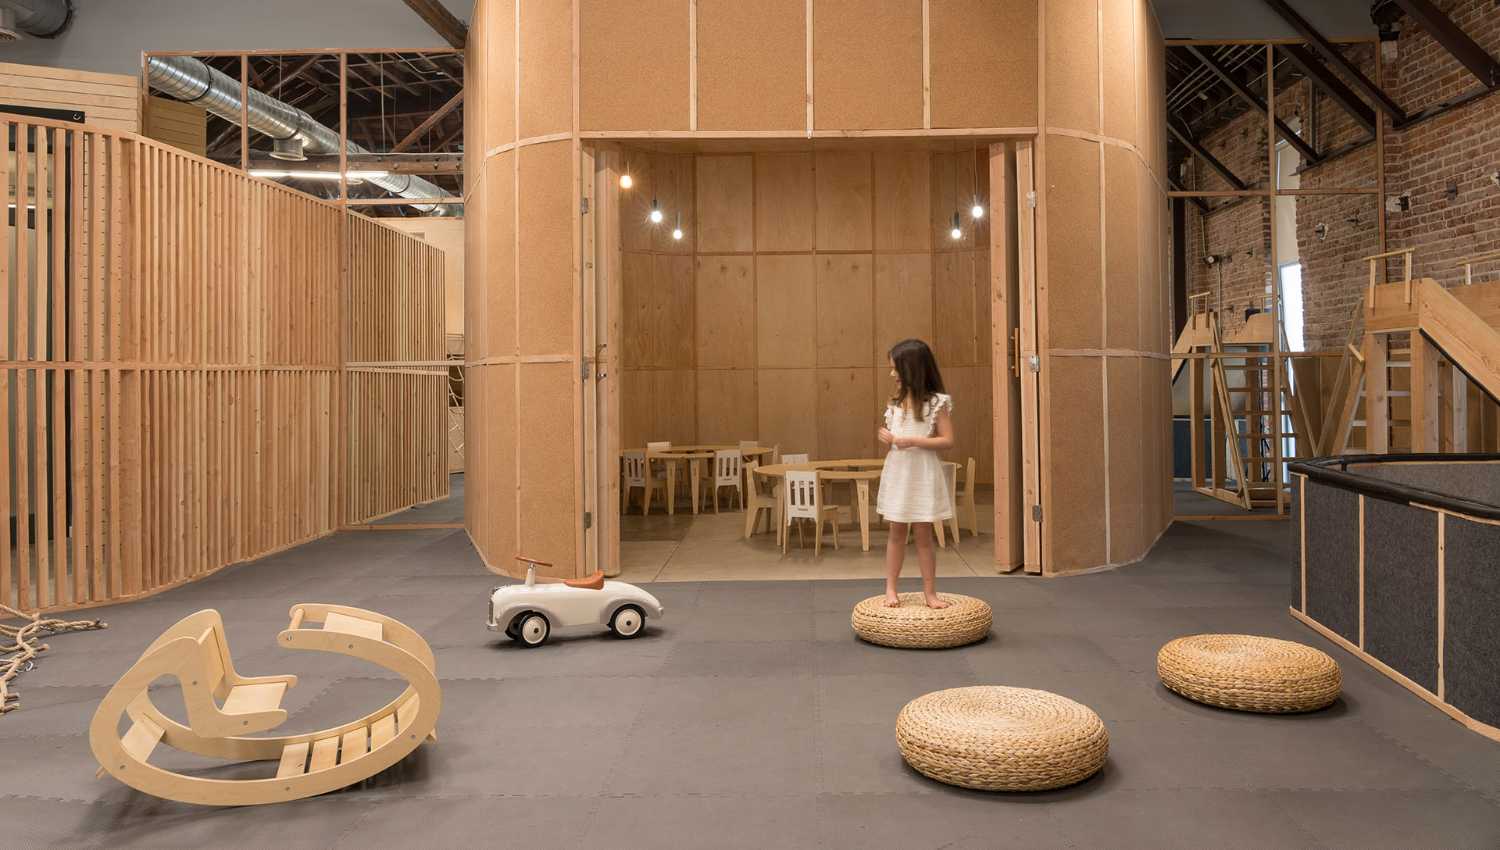 California headquarters for the Big and Tiny brand. Playground for adults and children